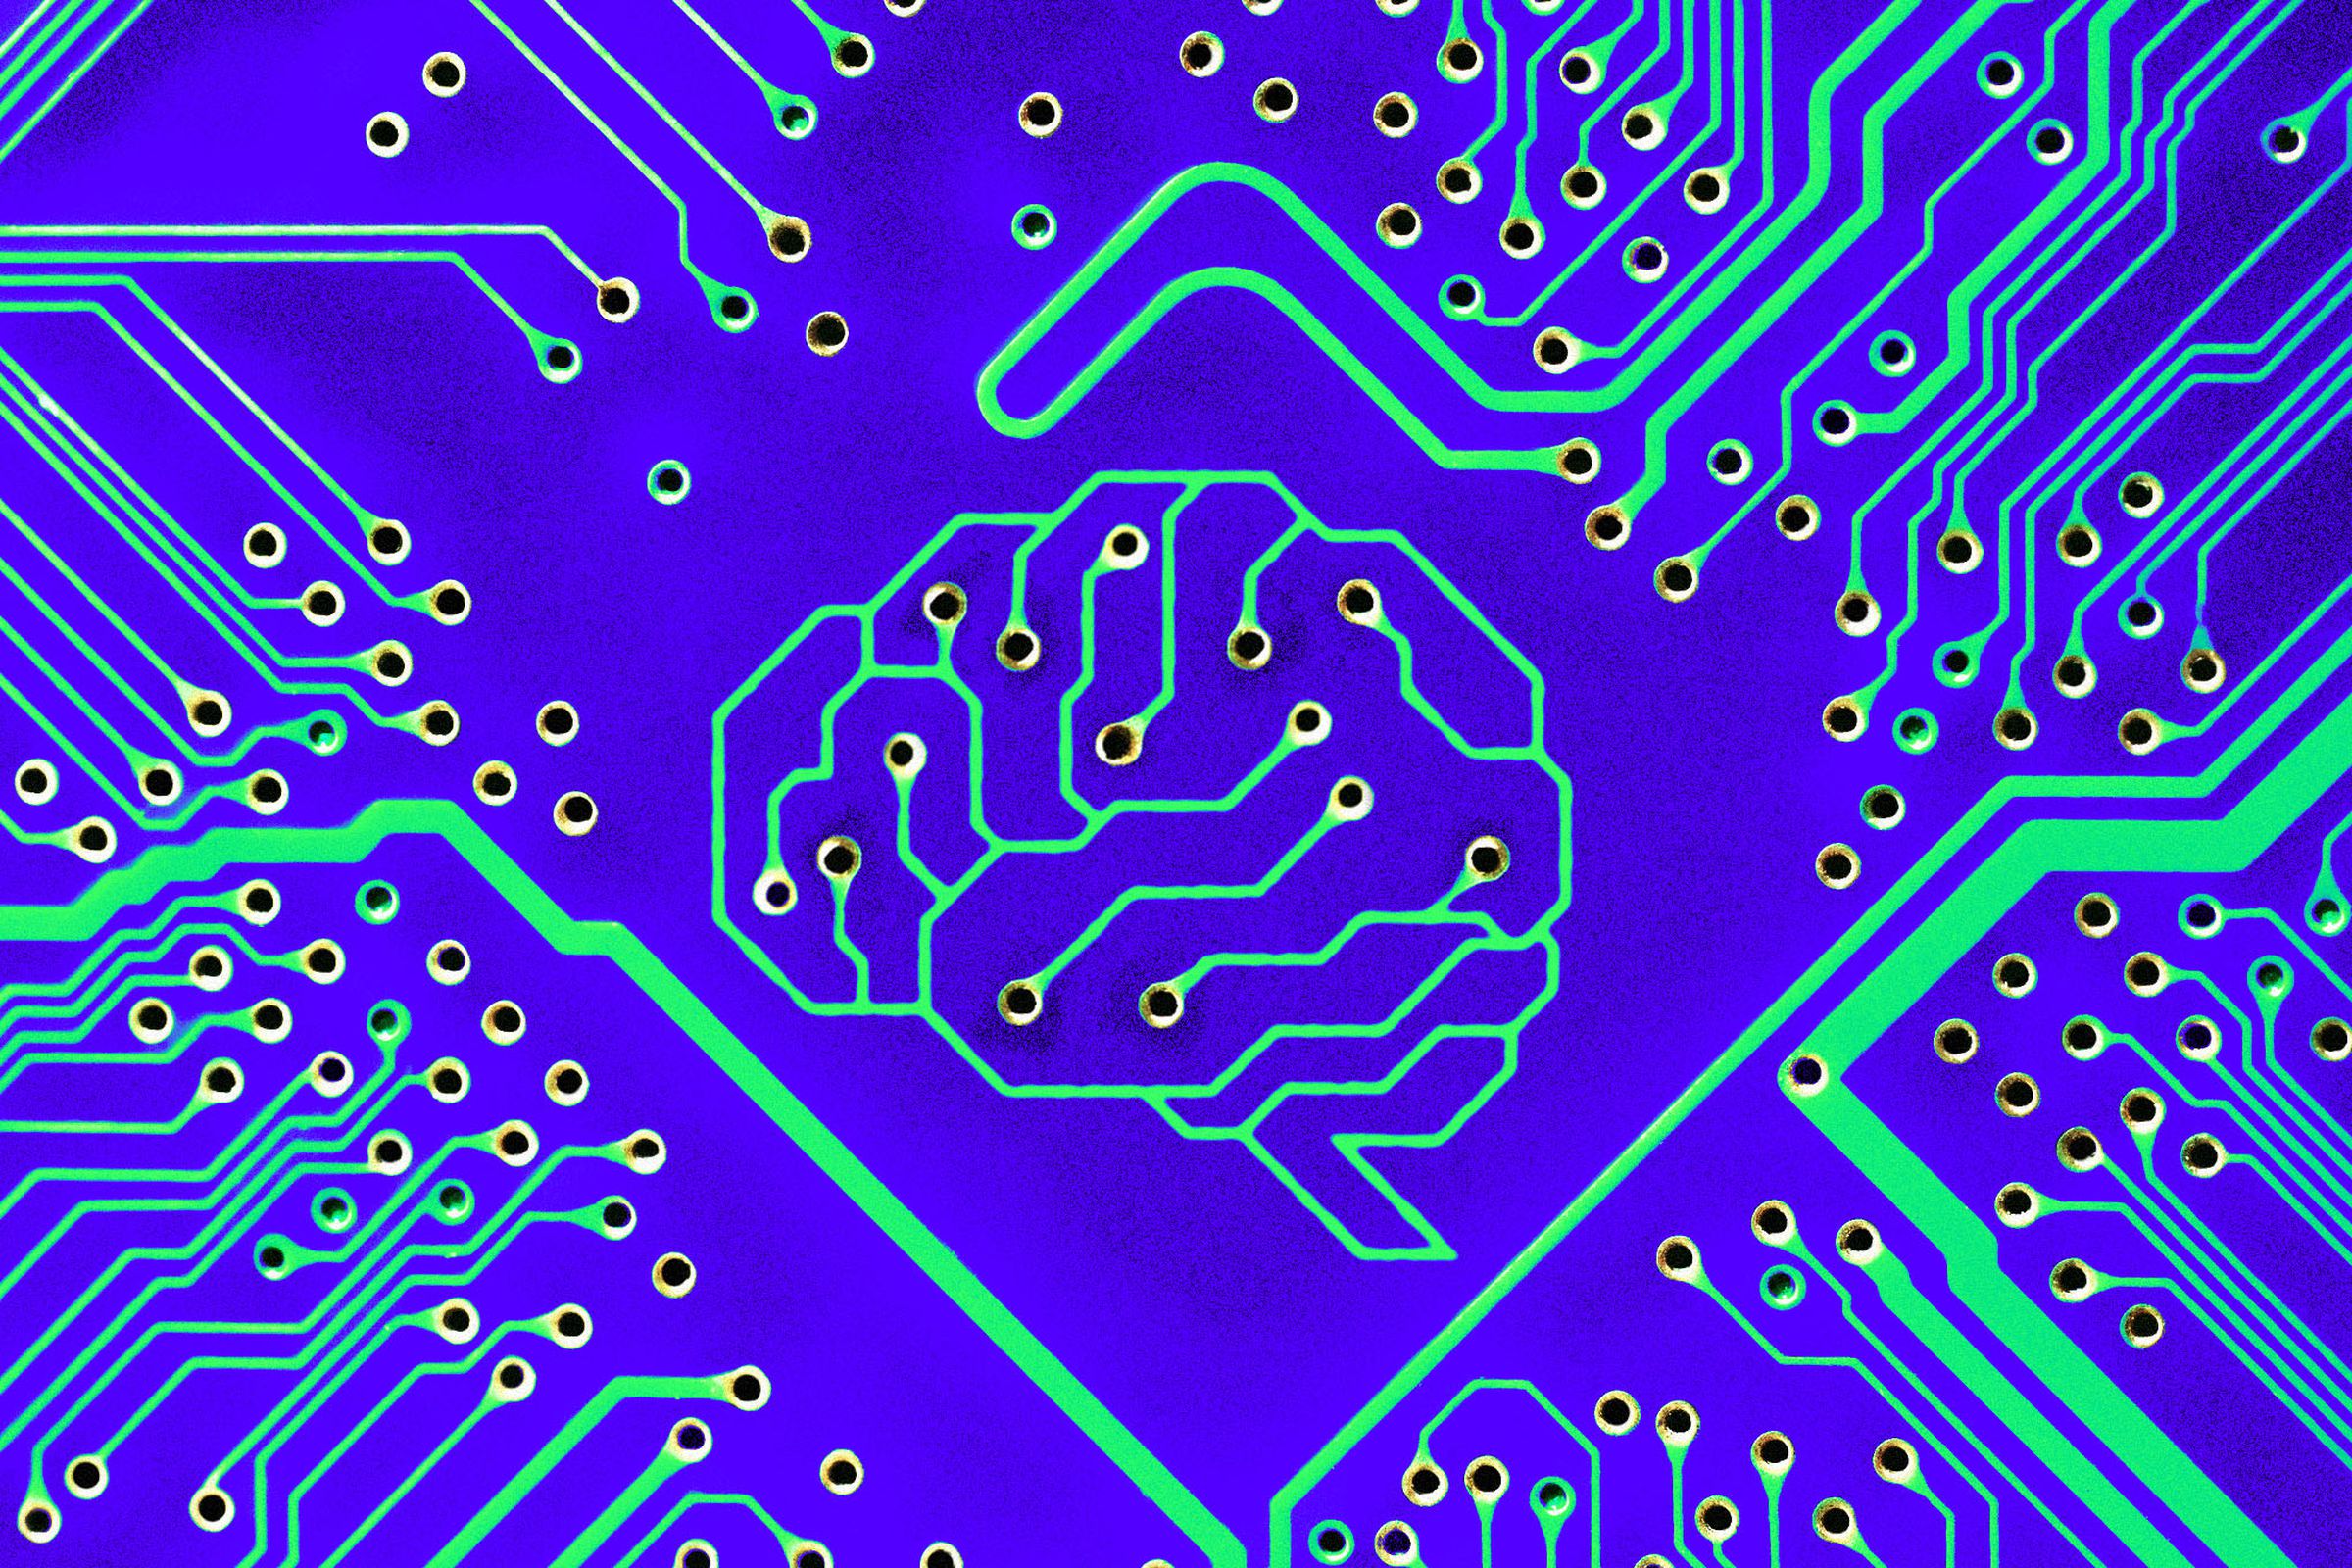 Photo illustration of the shape of a brain on a circuit board.